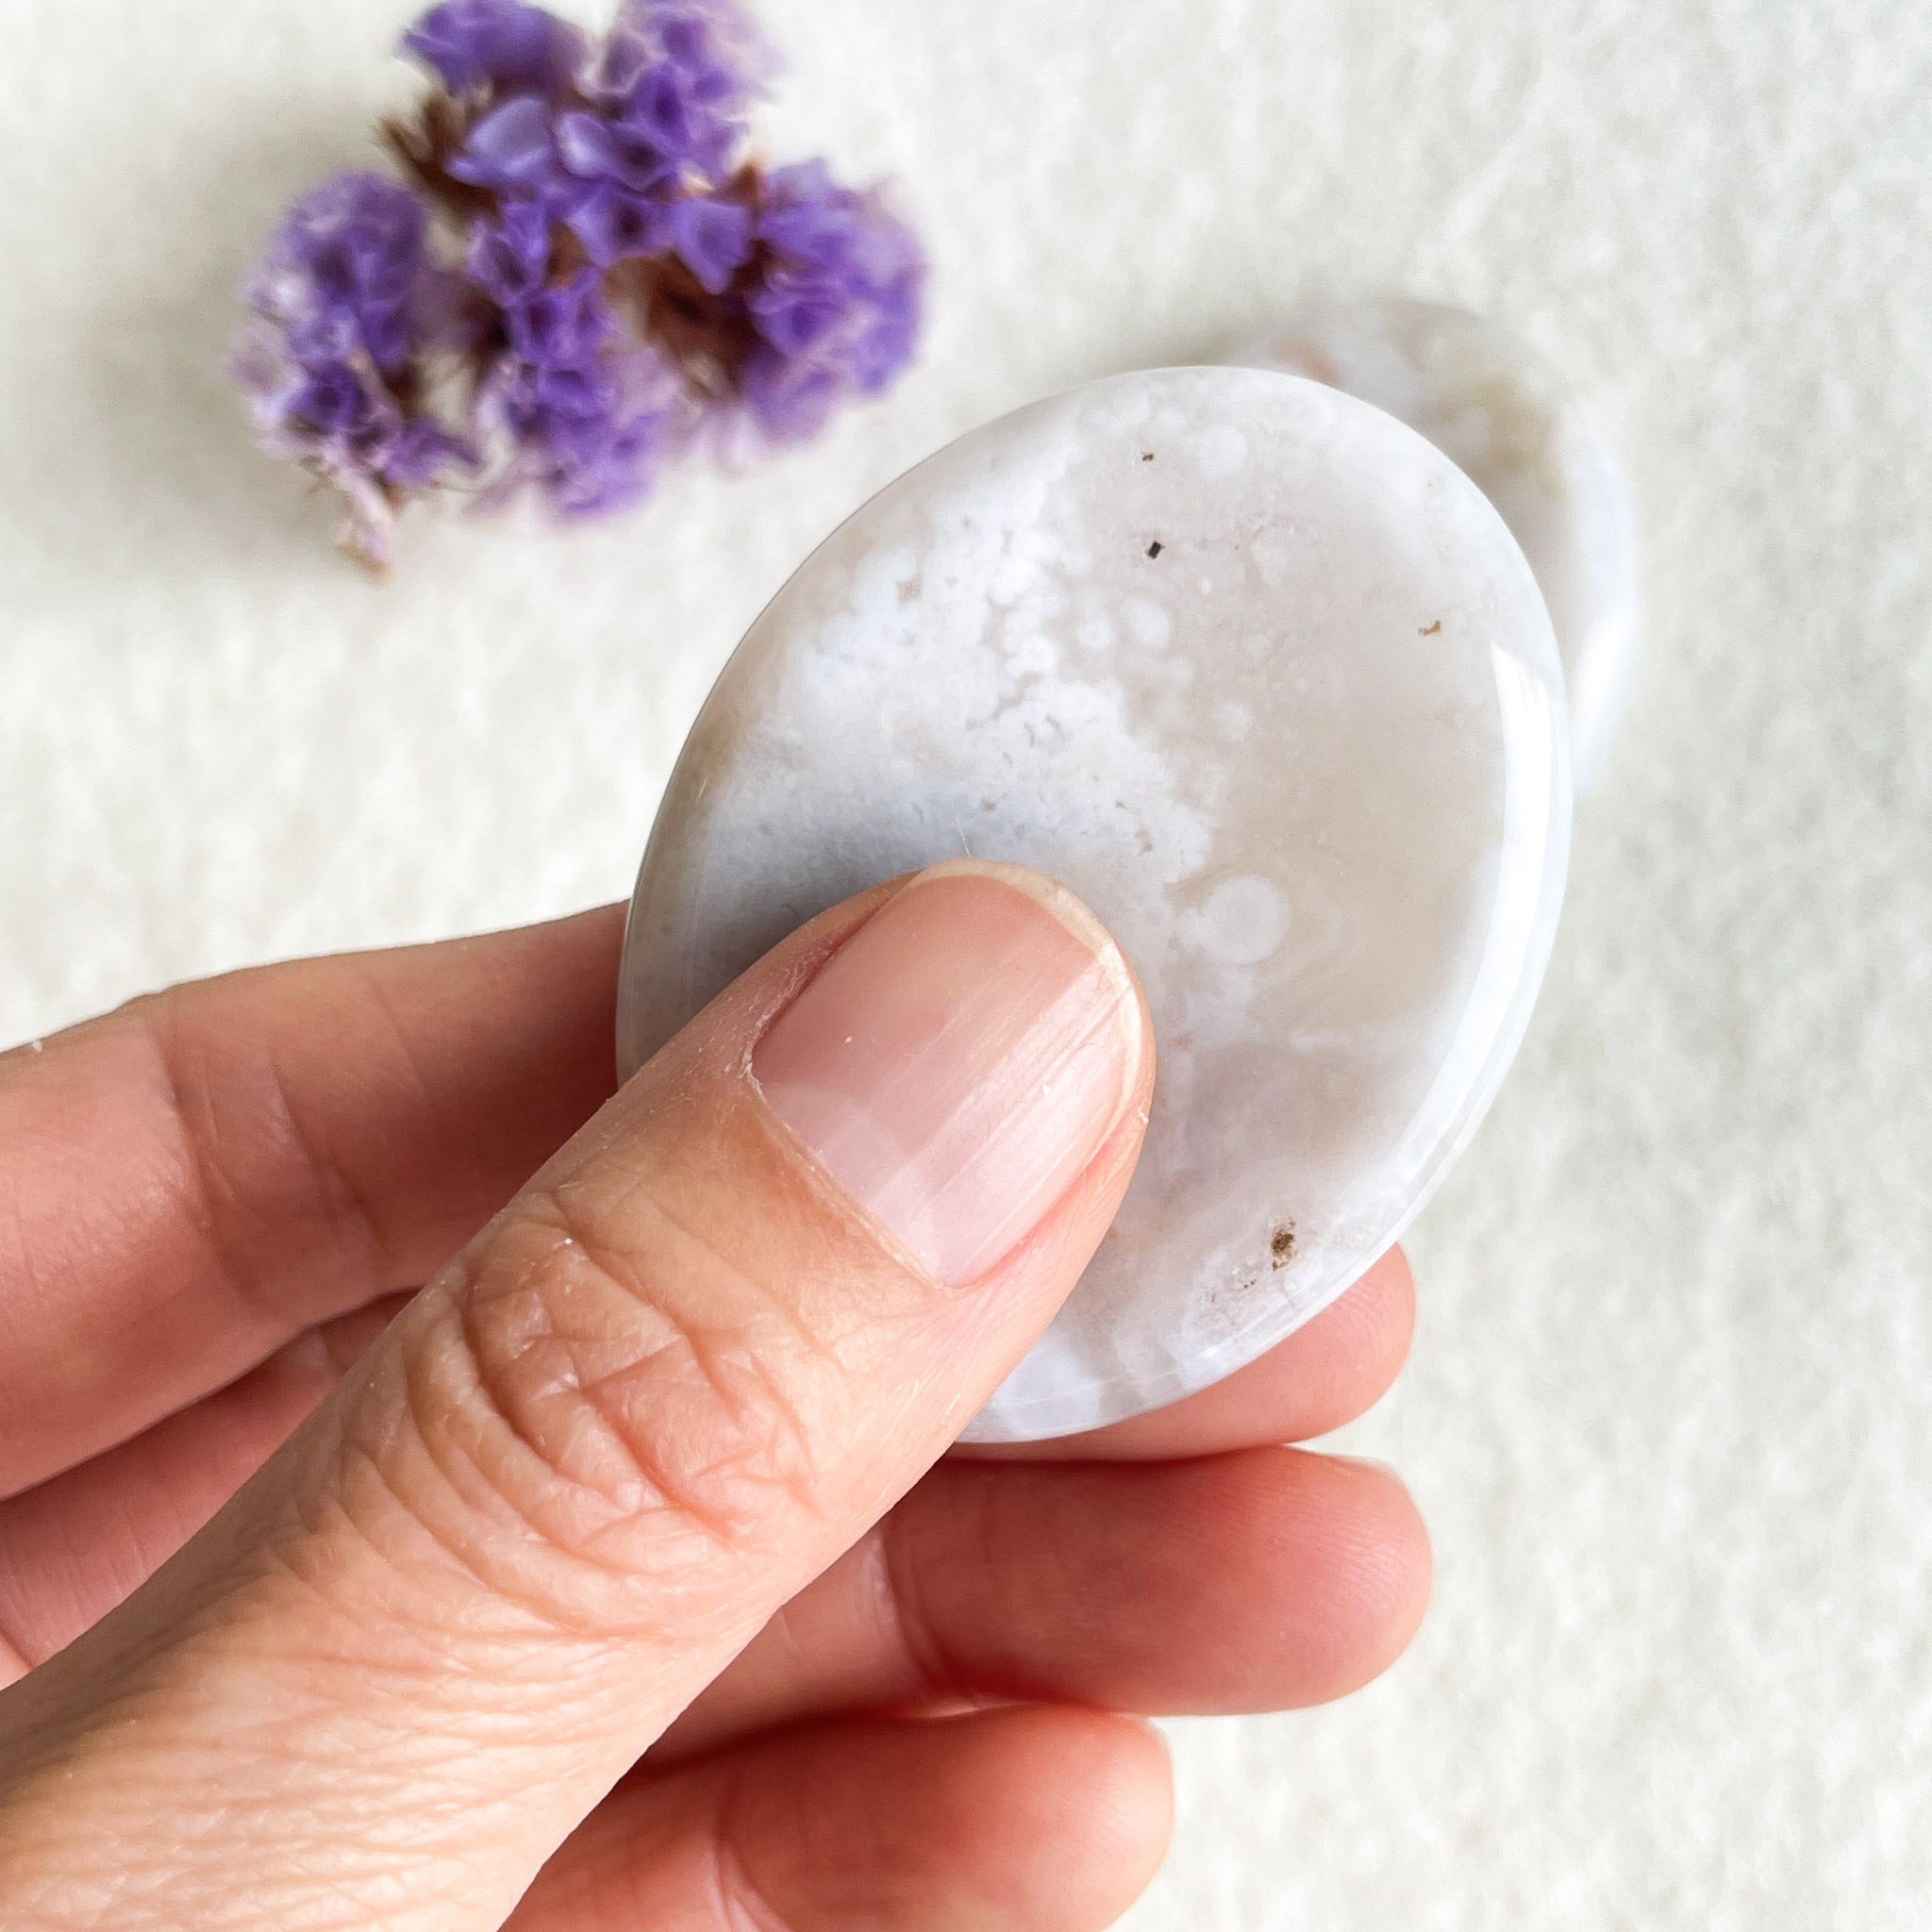 A close-up of a hand holding a smooth, polished white agate stone with natural patterns, next to small purple flowers on a textured white background.